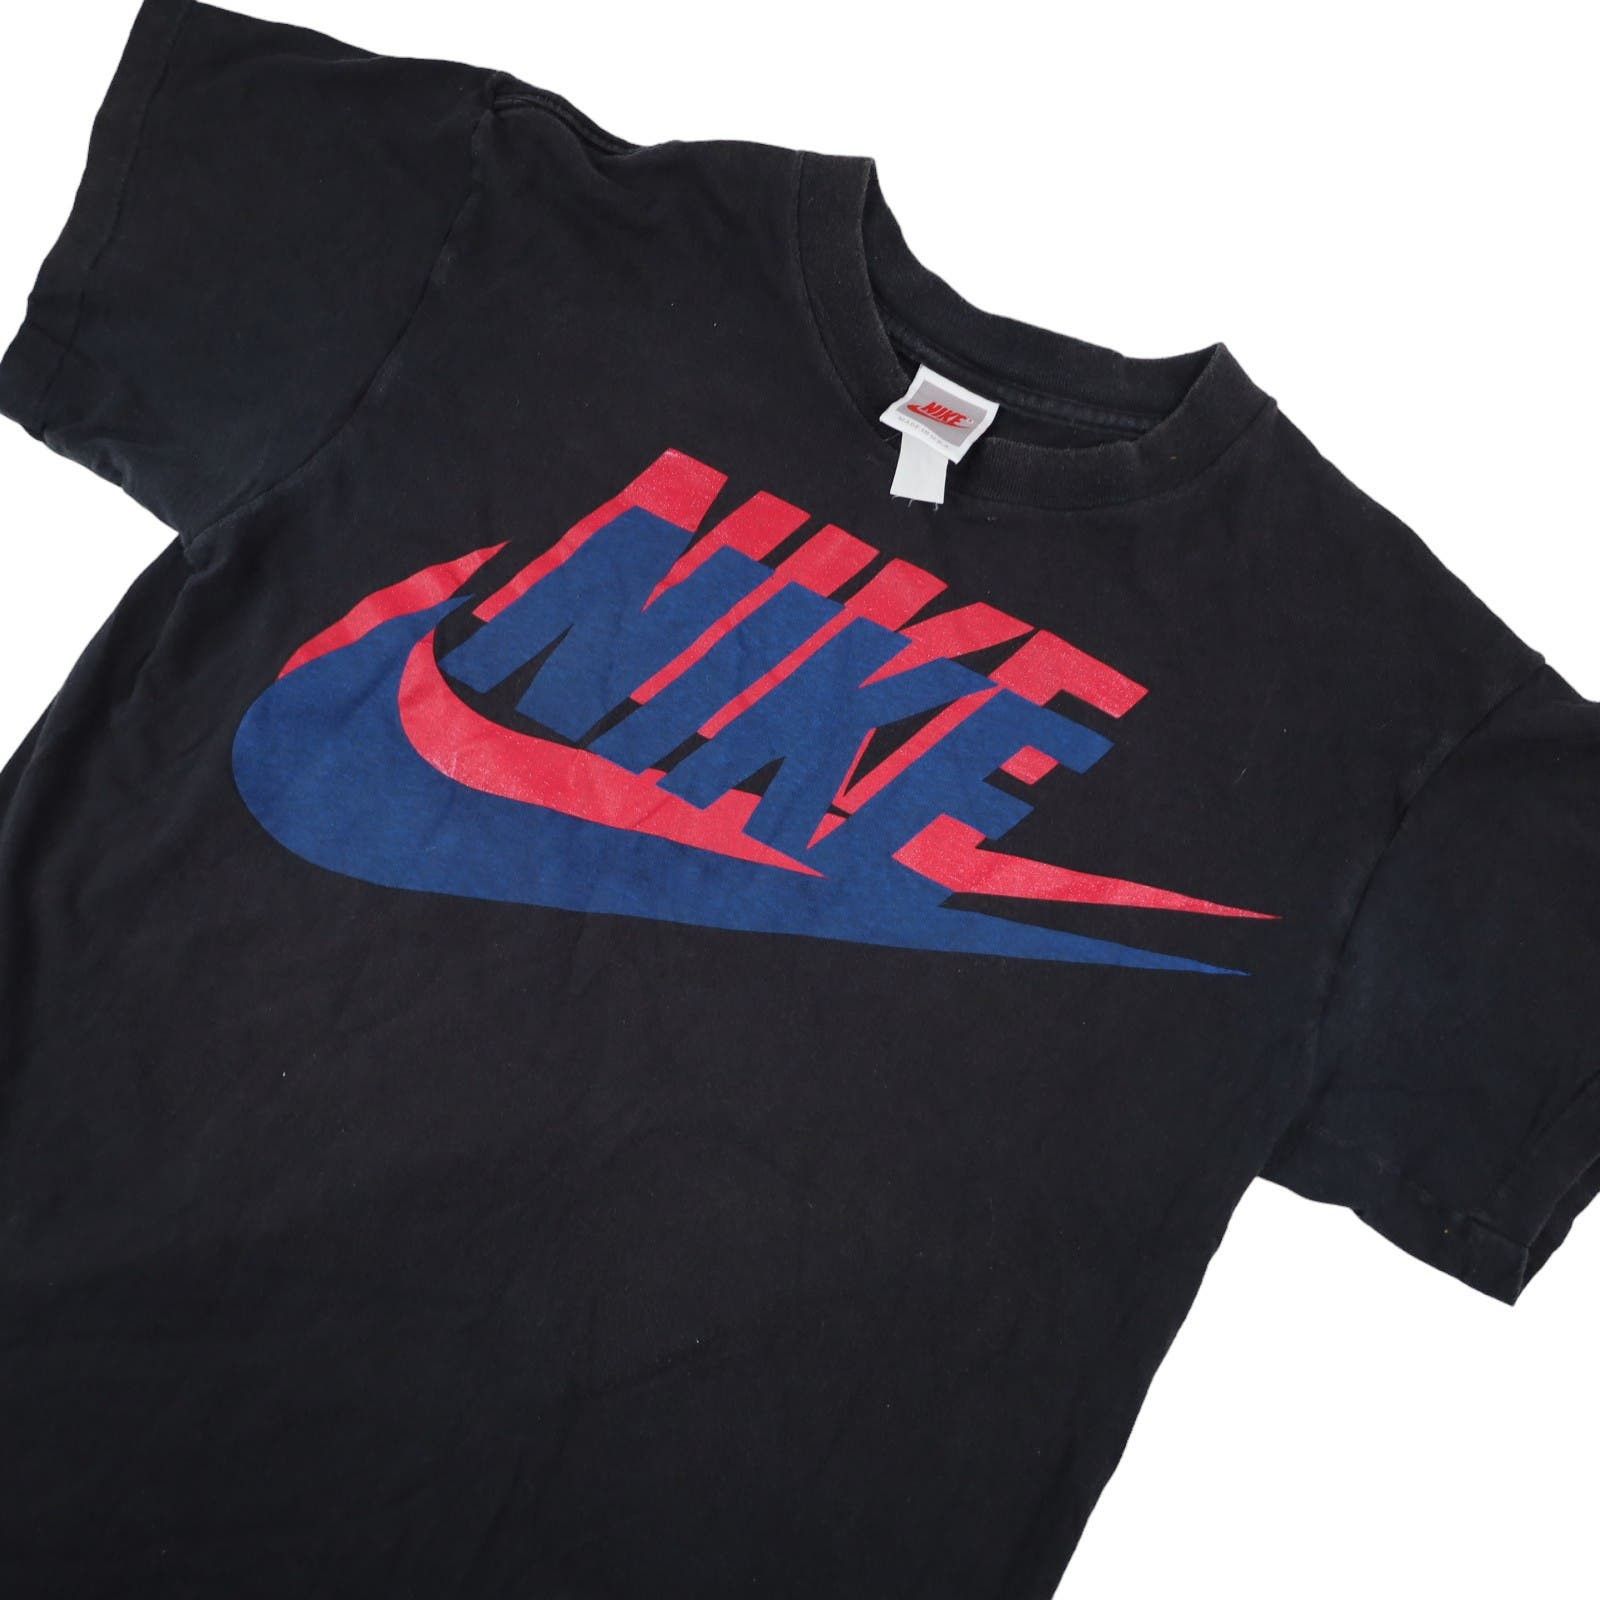 Nike Vintage 90s Nike Graphic Spellout T Shirt Size US L / EU 52-54 / 3 - 2 Preview